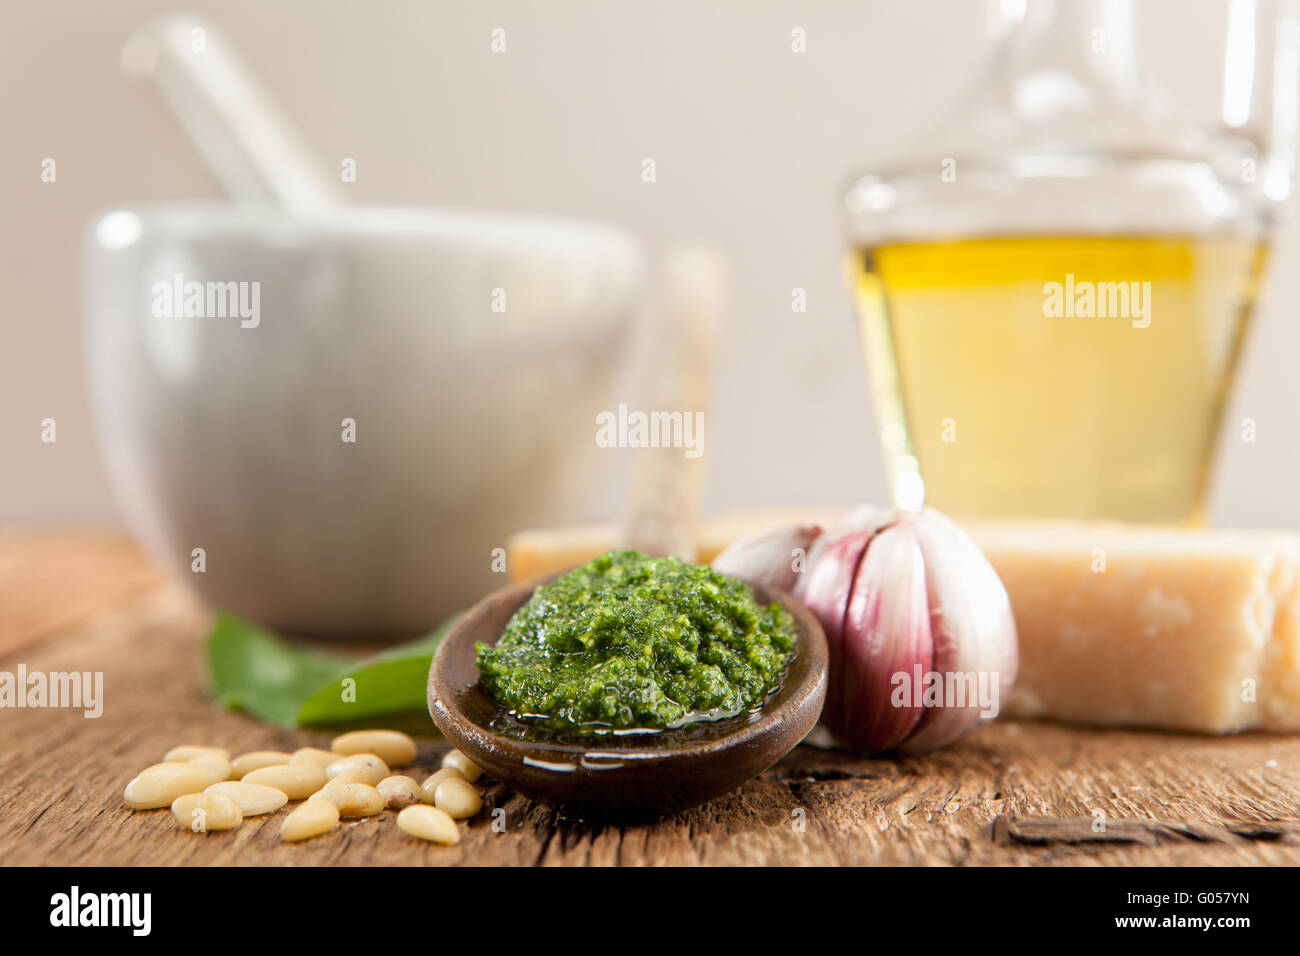 Homemade Pesto of Ramsons with all ingredients Stock Photo